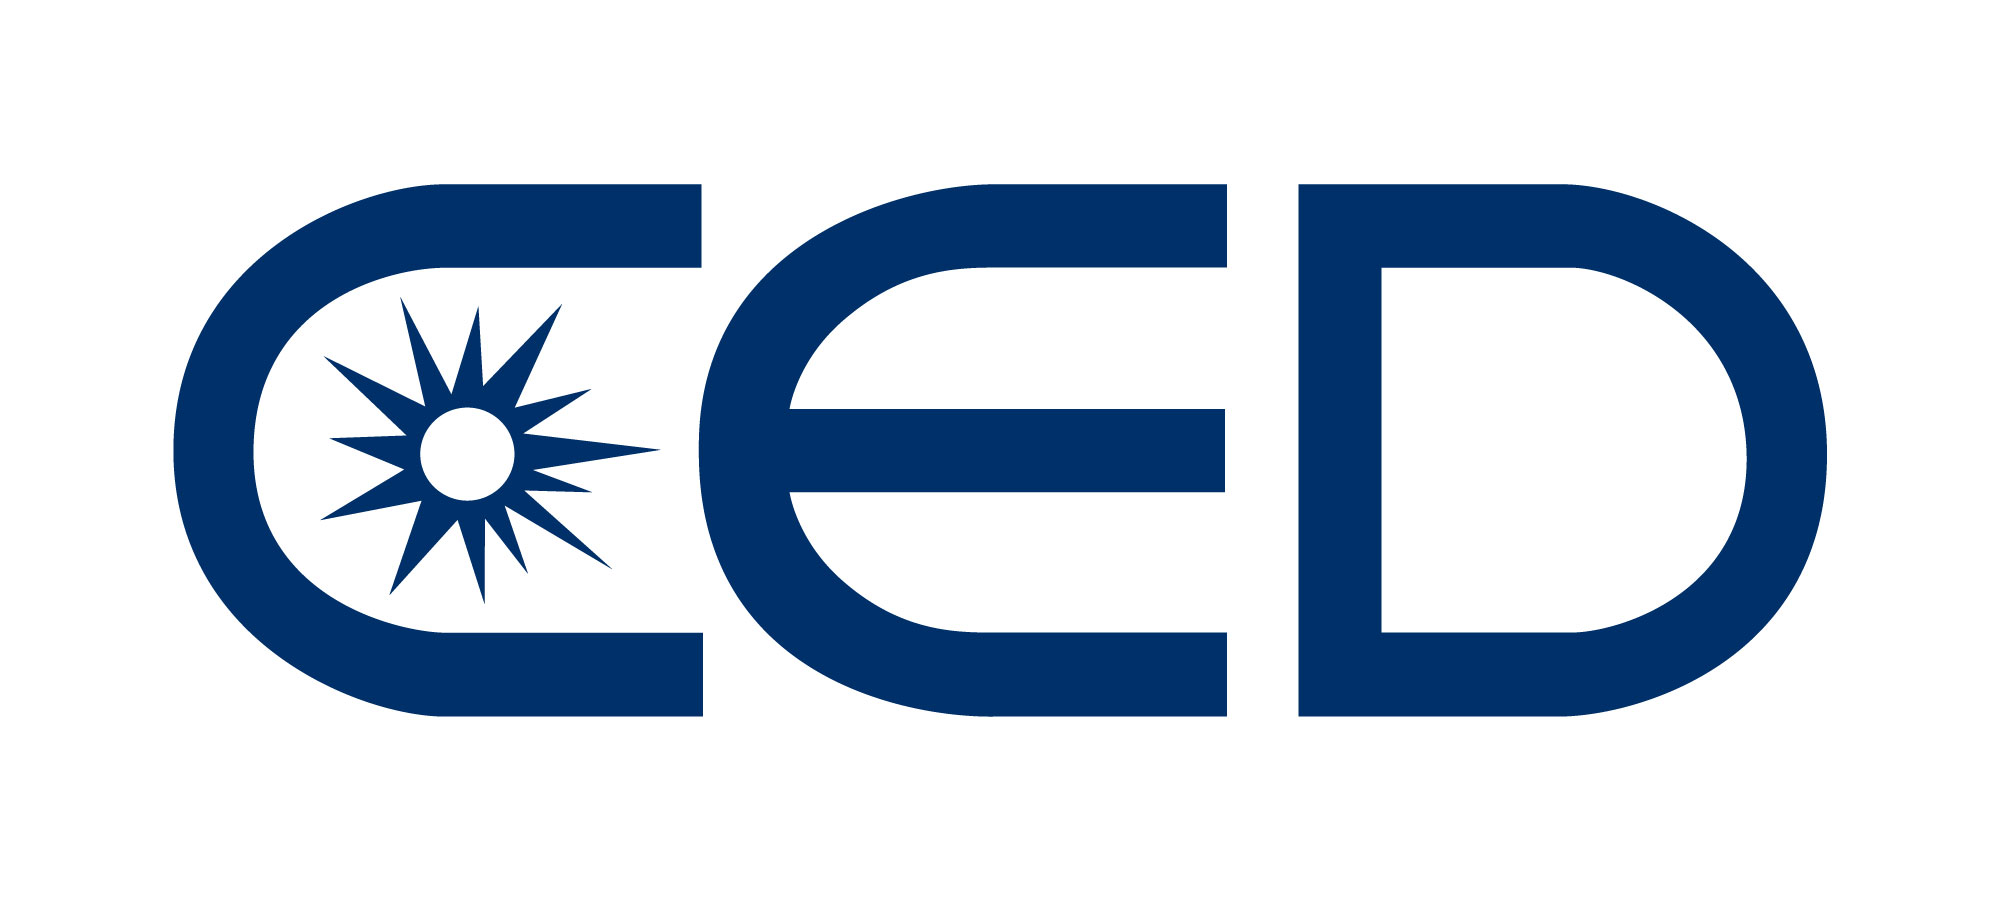 CED: Consolidated Electrical Distributors, Inc.